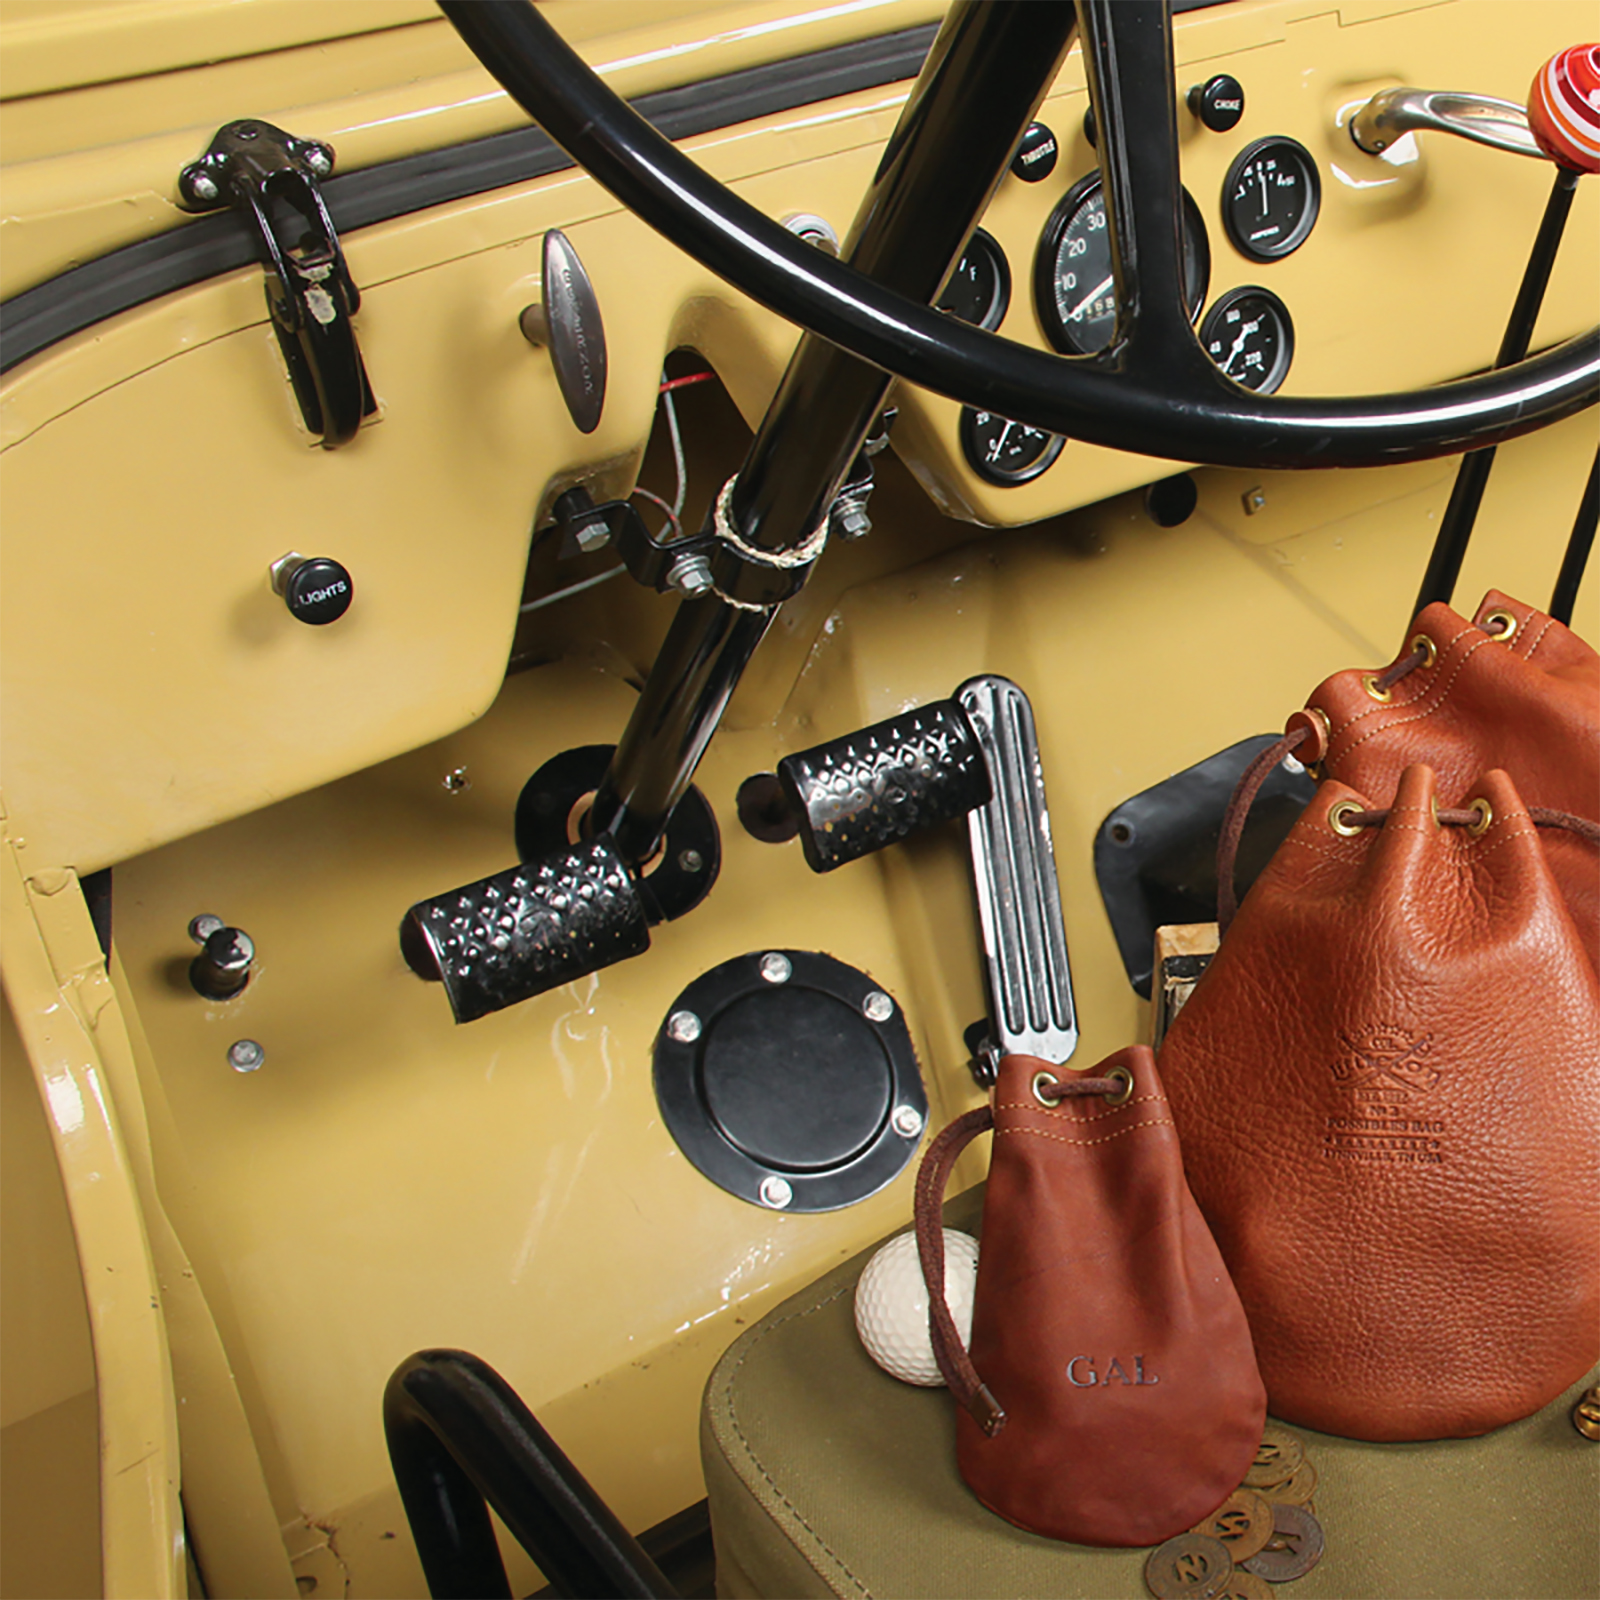 Wheel and dash of a 1951 Willy's Jeep with Possibles Bags resting on the seat